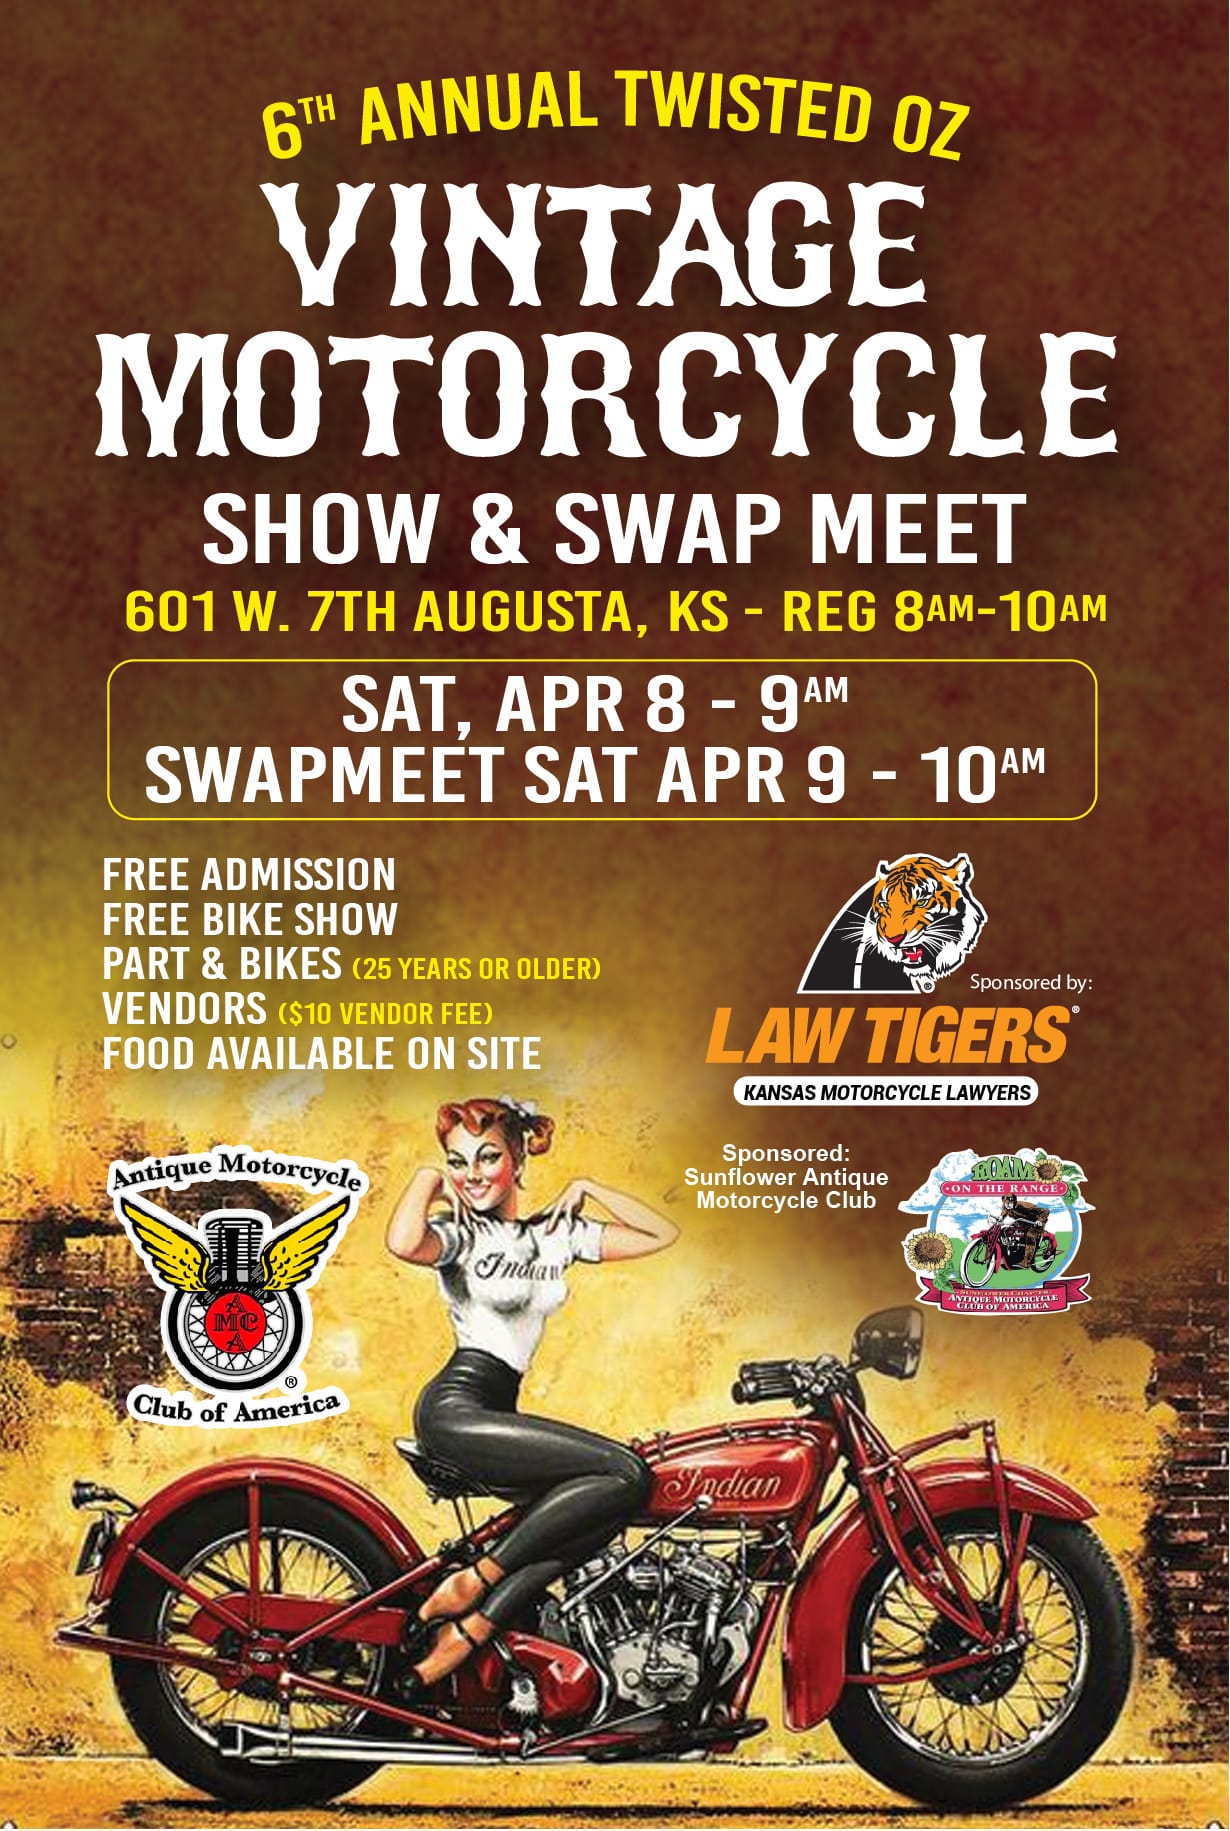 6th Annual Twisted OZ Vintage Motorcycle Show & Swap Meet Motorcycle